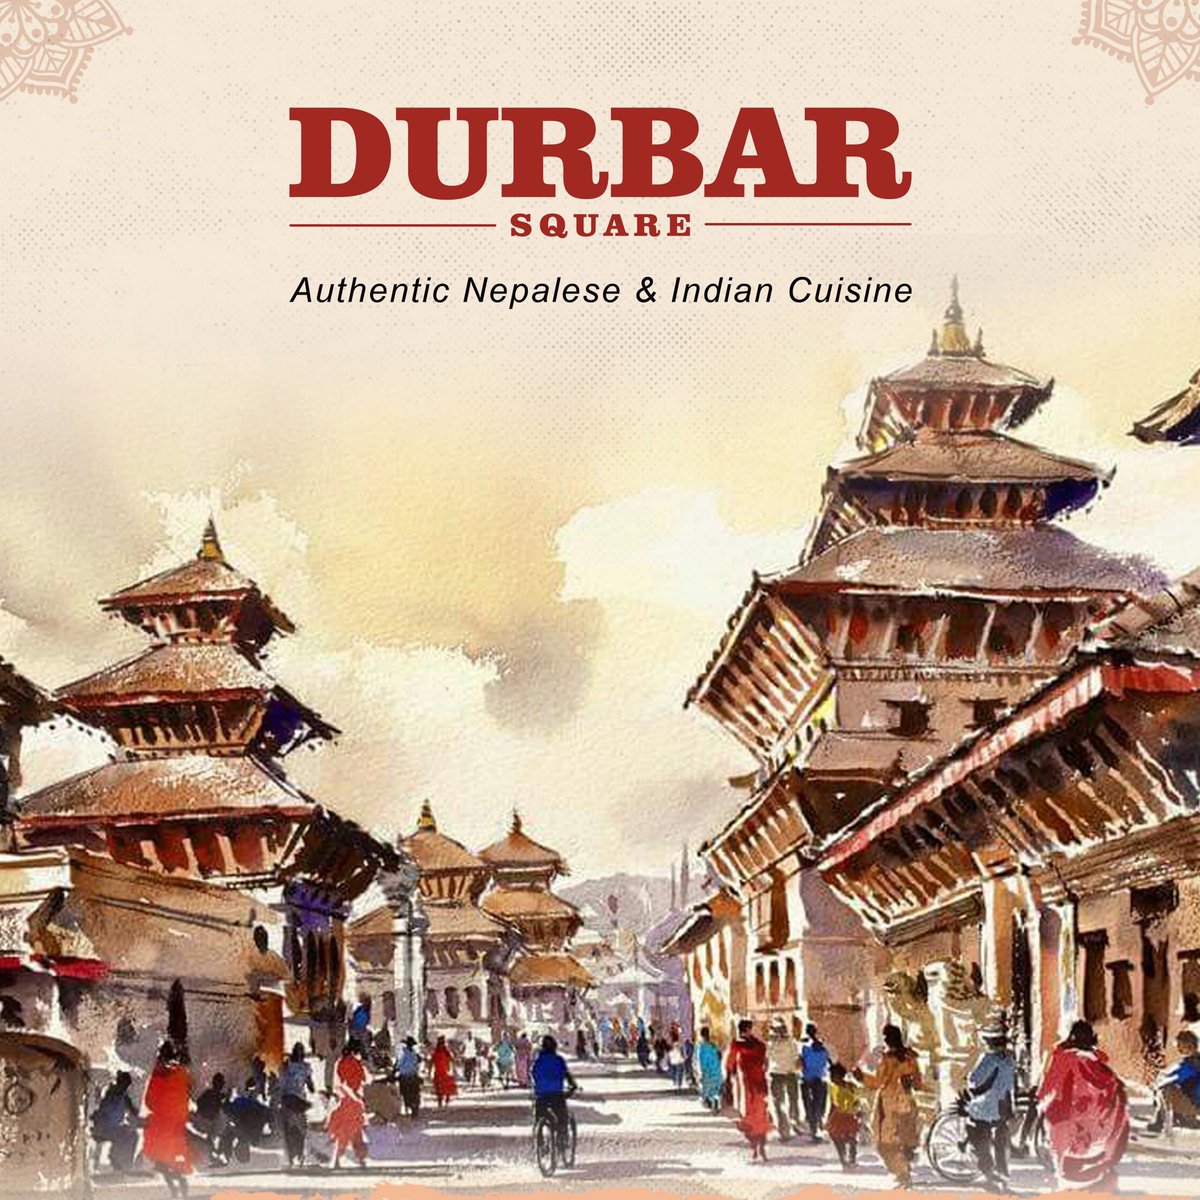 Didsbury, we welcome you to your newest Indian, Nepalese restaurant in Manchester. 

Now offering take-out and delivery to your doorstep

#manchesterfood #durbarsquare #foodie #indiancuisine #nepalicuisine #didsbury